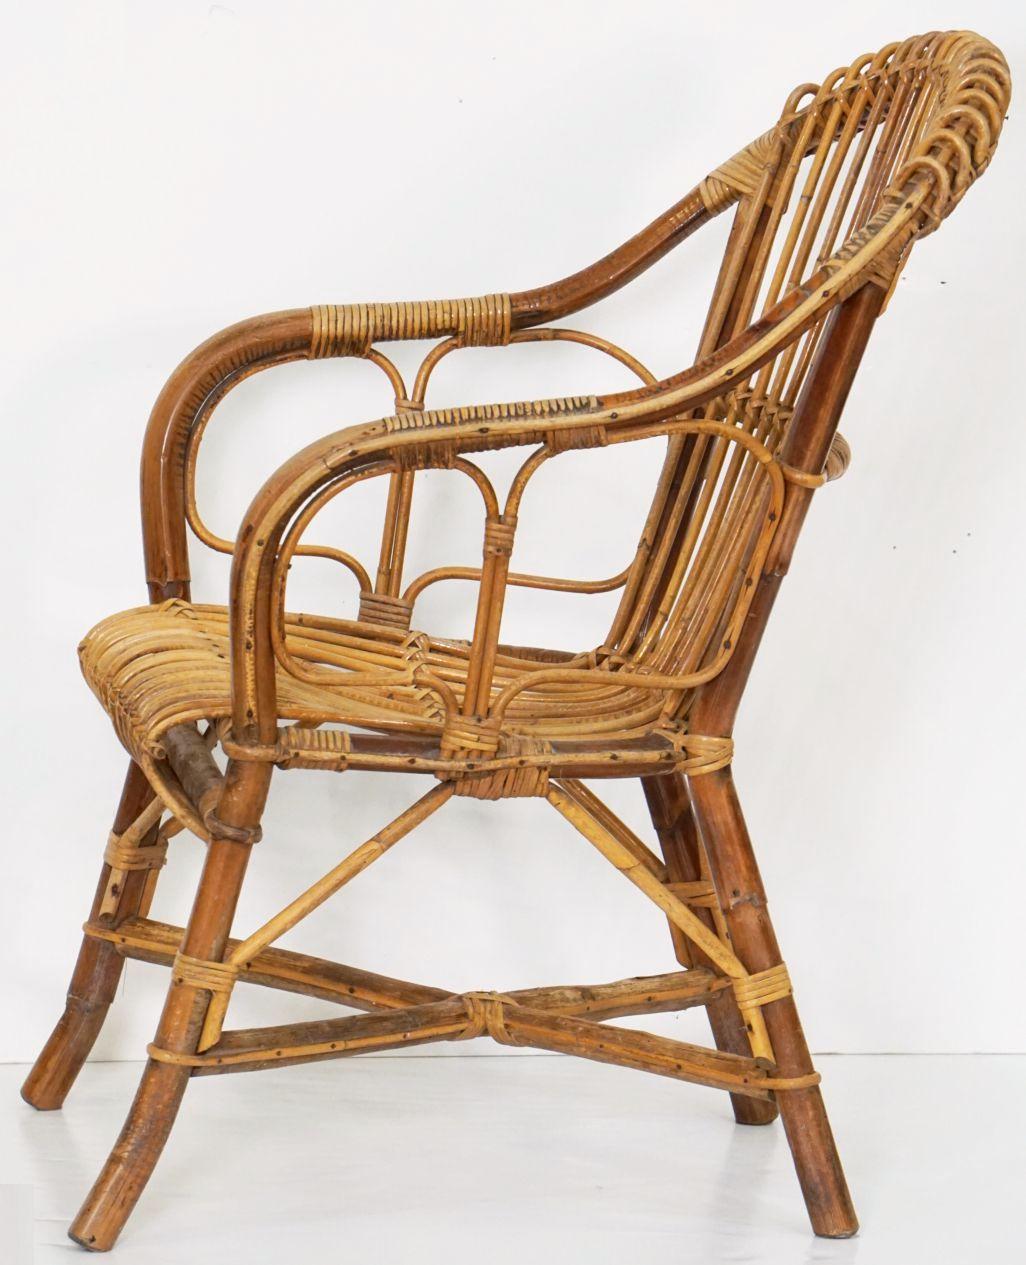 Italian Fan-Backed Arm Chairs of Rattan and Bamboo from the Mid-20th Century For Sale 1